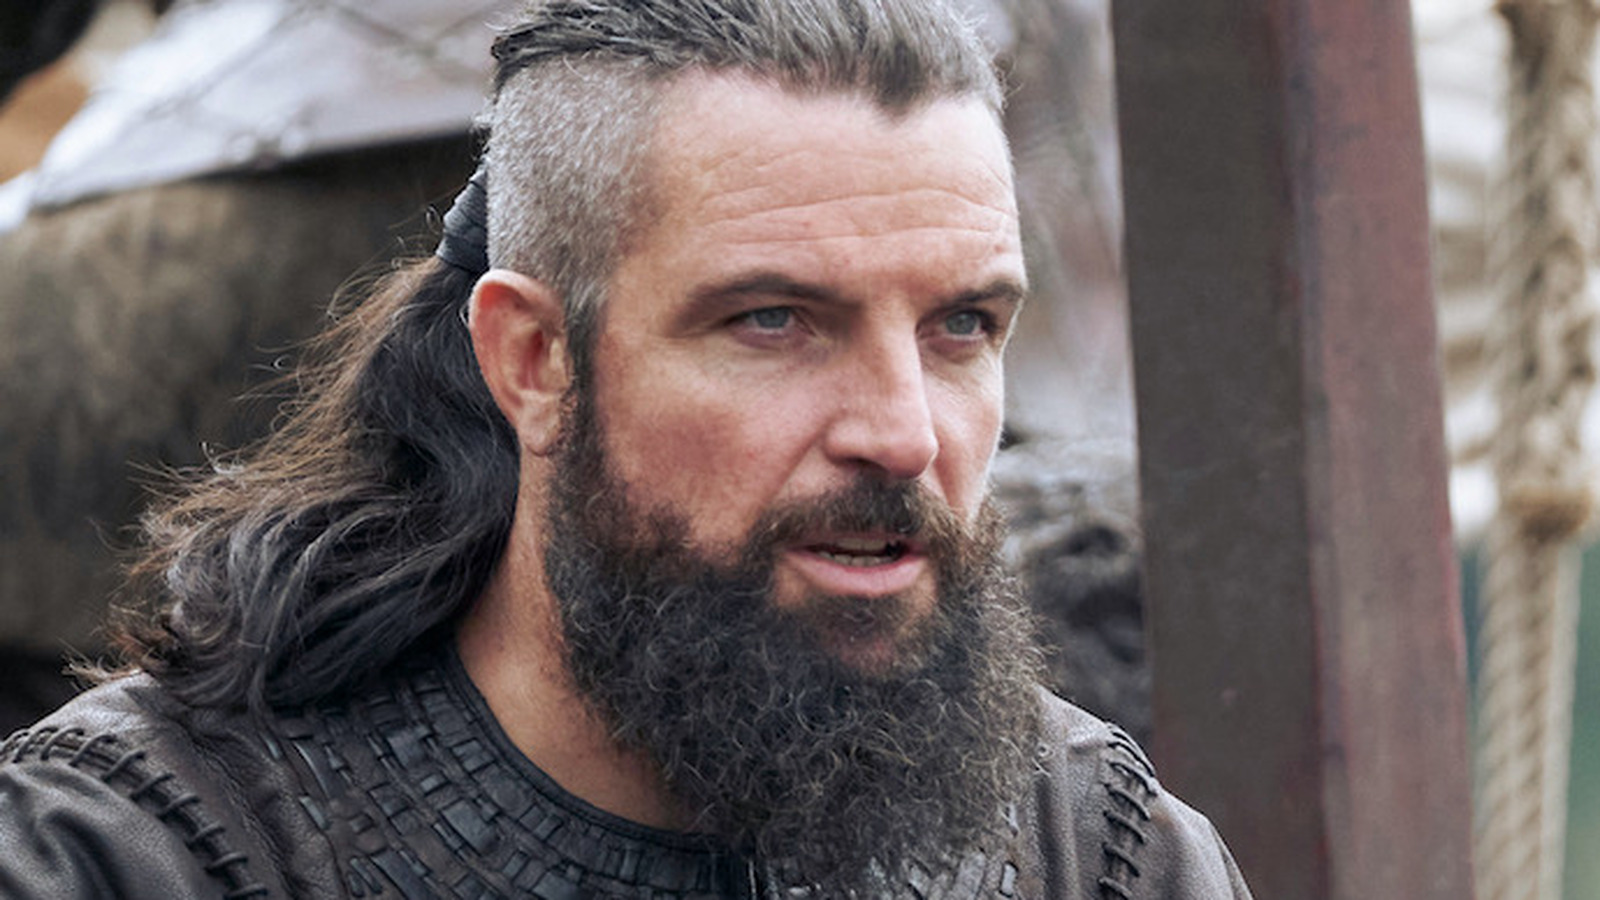 Bradley Freegard on Taking Up the Crown as King Canute in Vikings: Valhalla